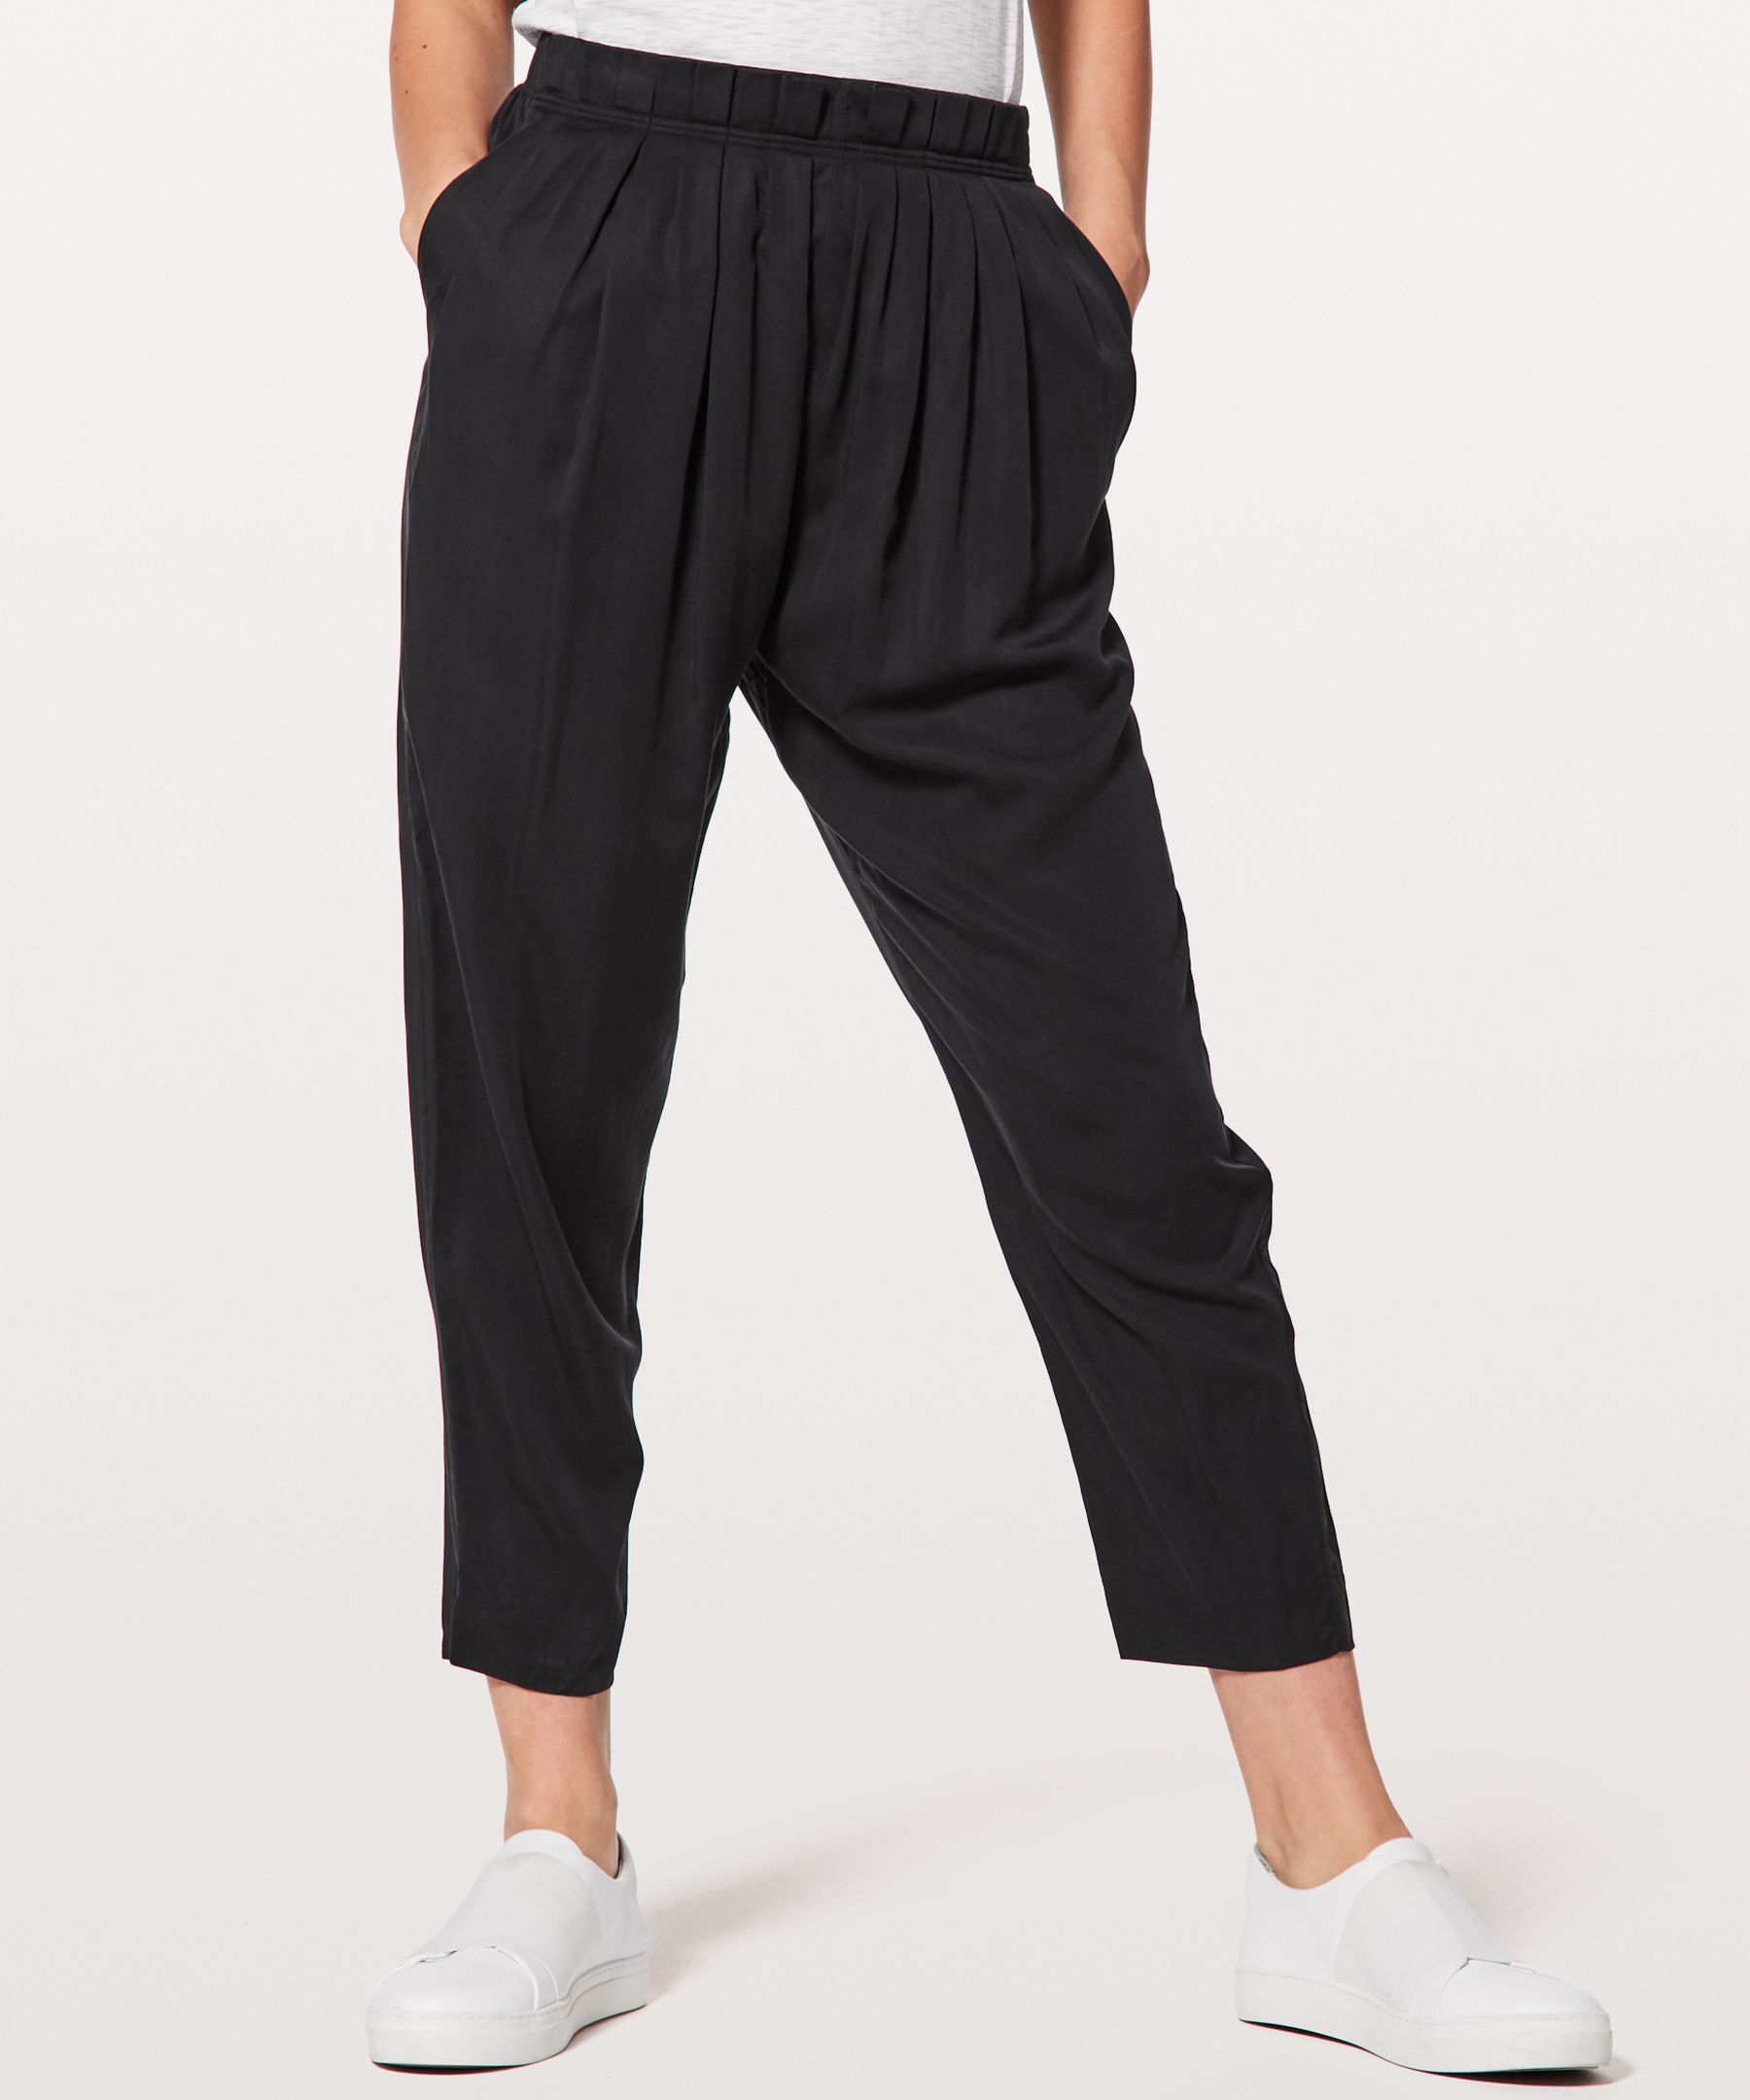 Lululemon Can You Feel The Pleat Sweatpant In Black